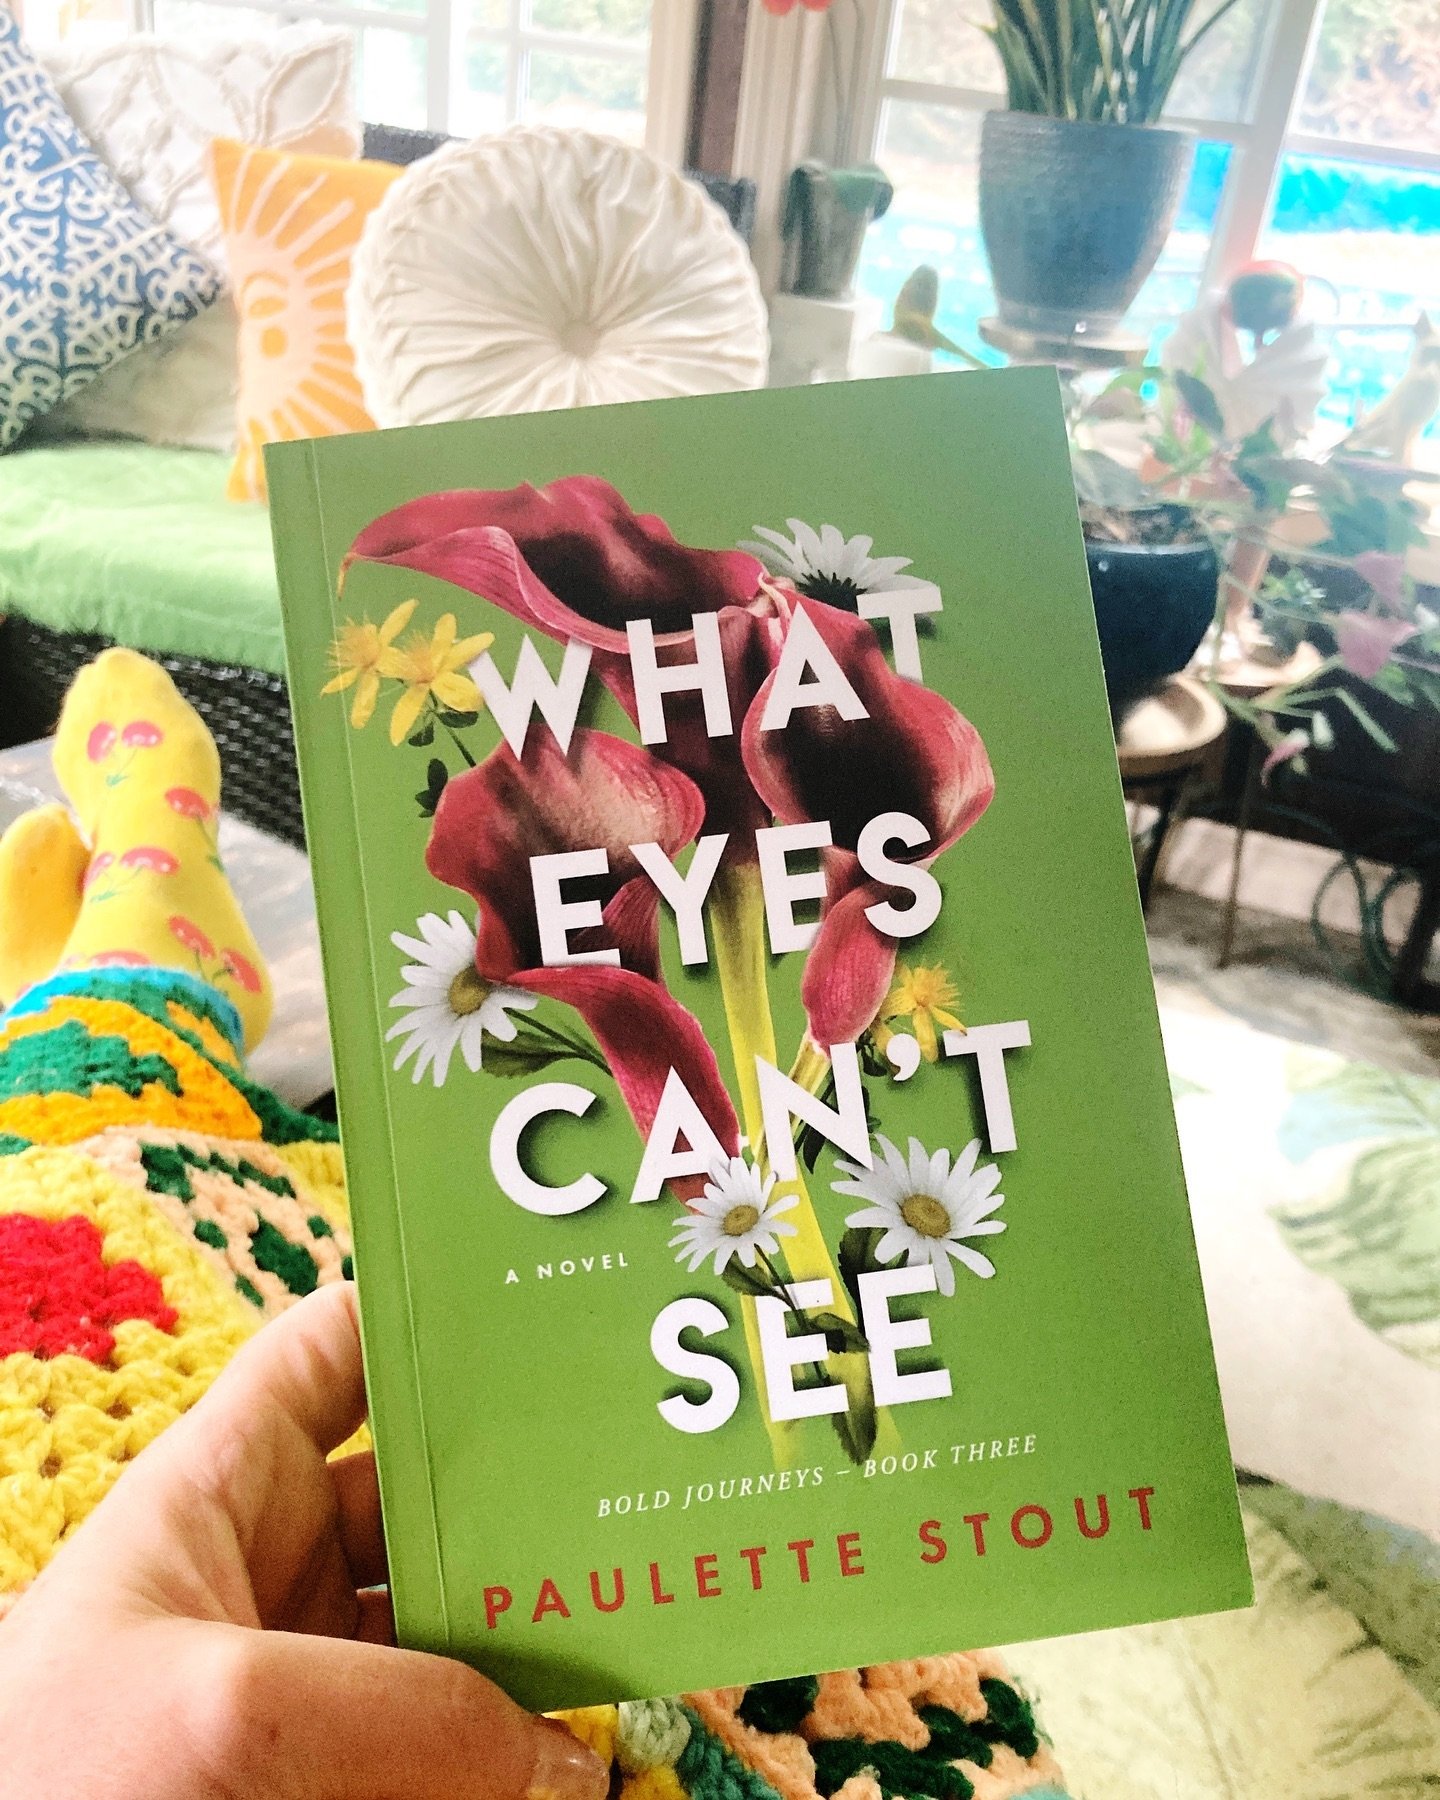 I must have moved to the PNW without knowing it because all it does in LA anymore is rain! I&rsquo;m not complaining&mdash;I&rsquo;m a pluviophile and rainy weather is the best excuse for curling up with a good book!

Today&rsquo;s read is WHAT EYES 